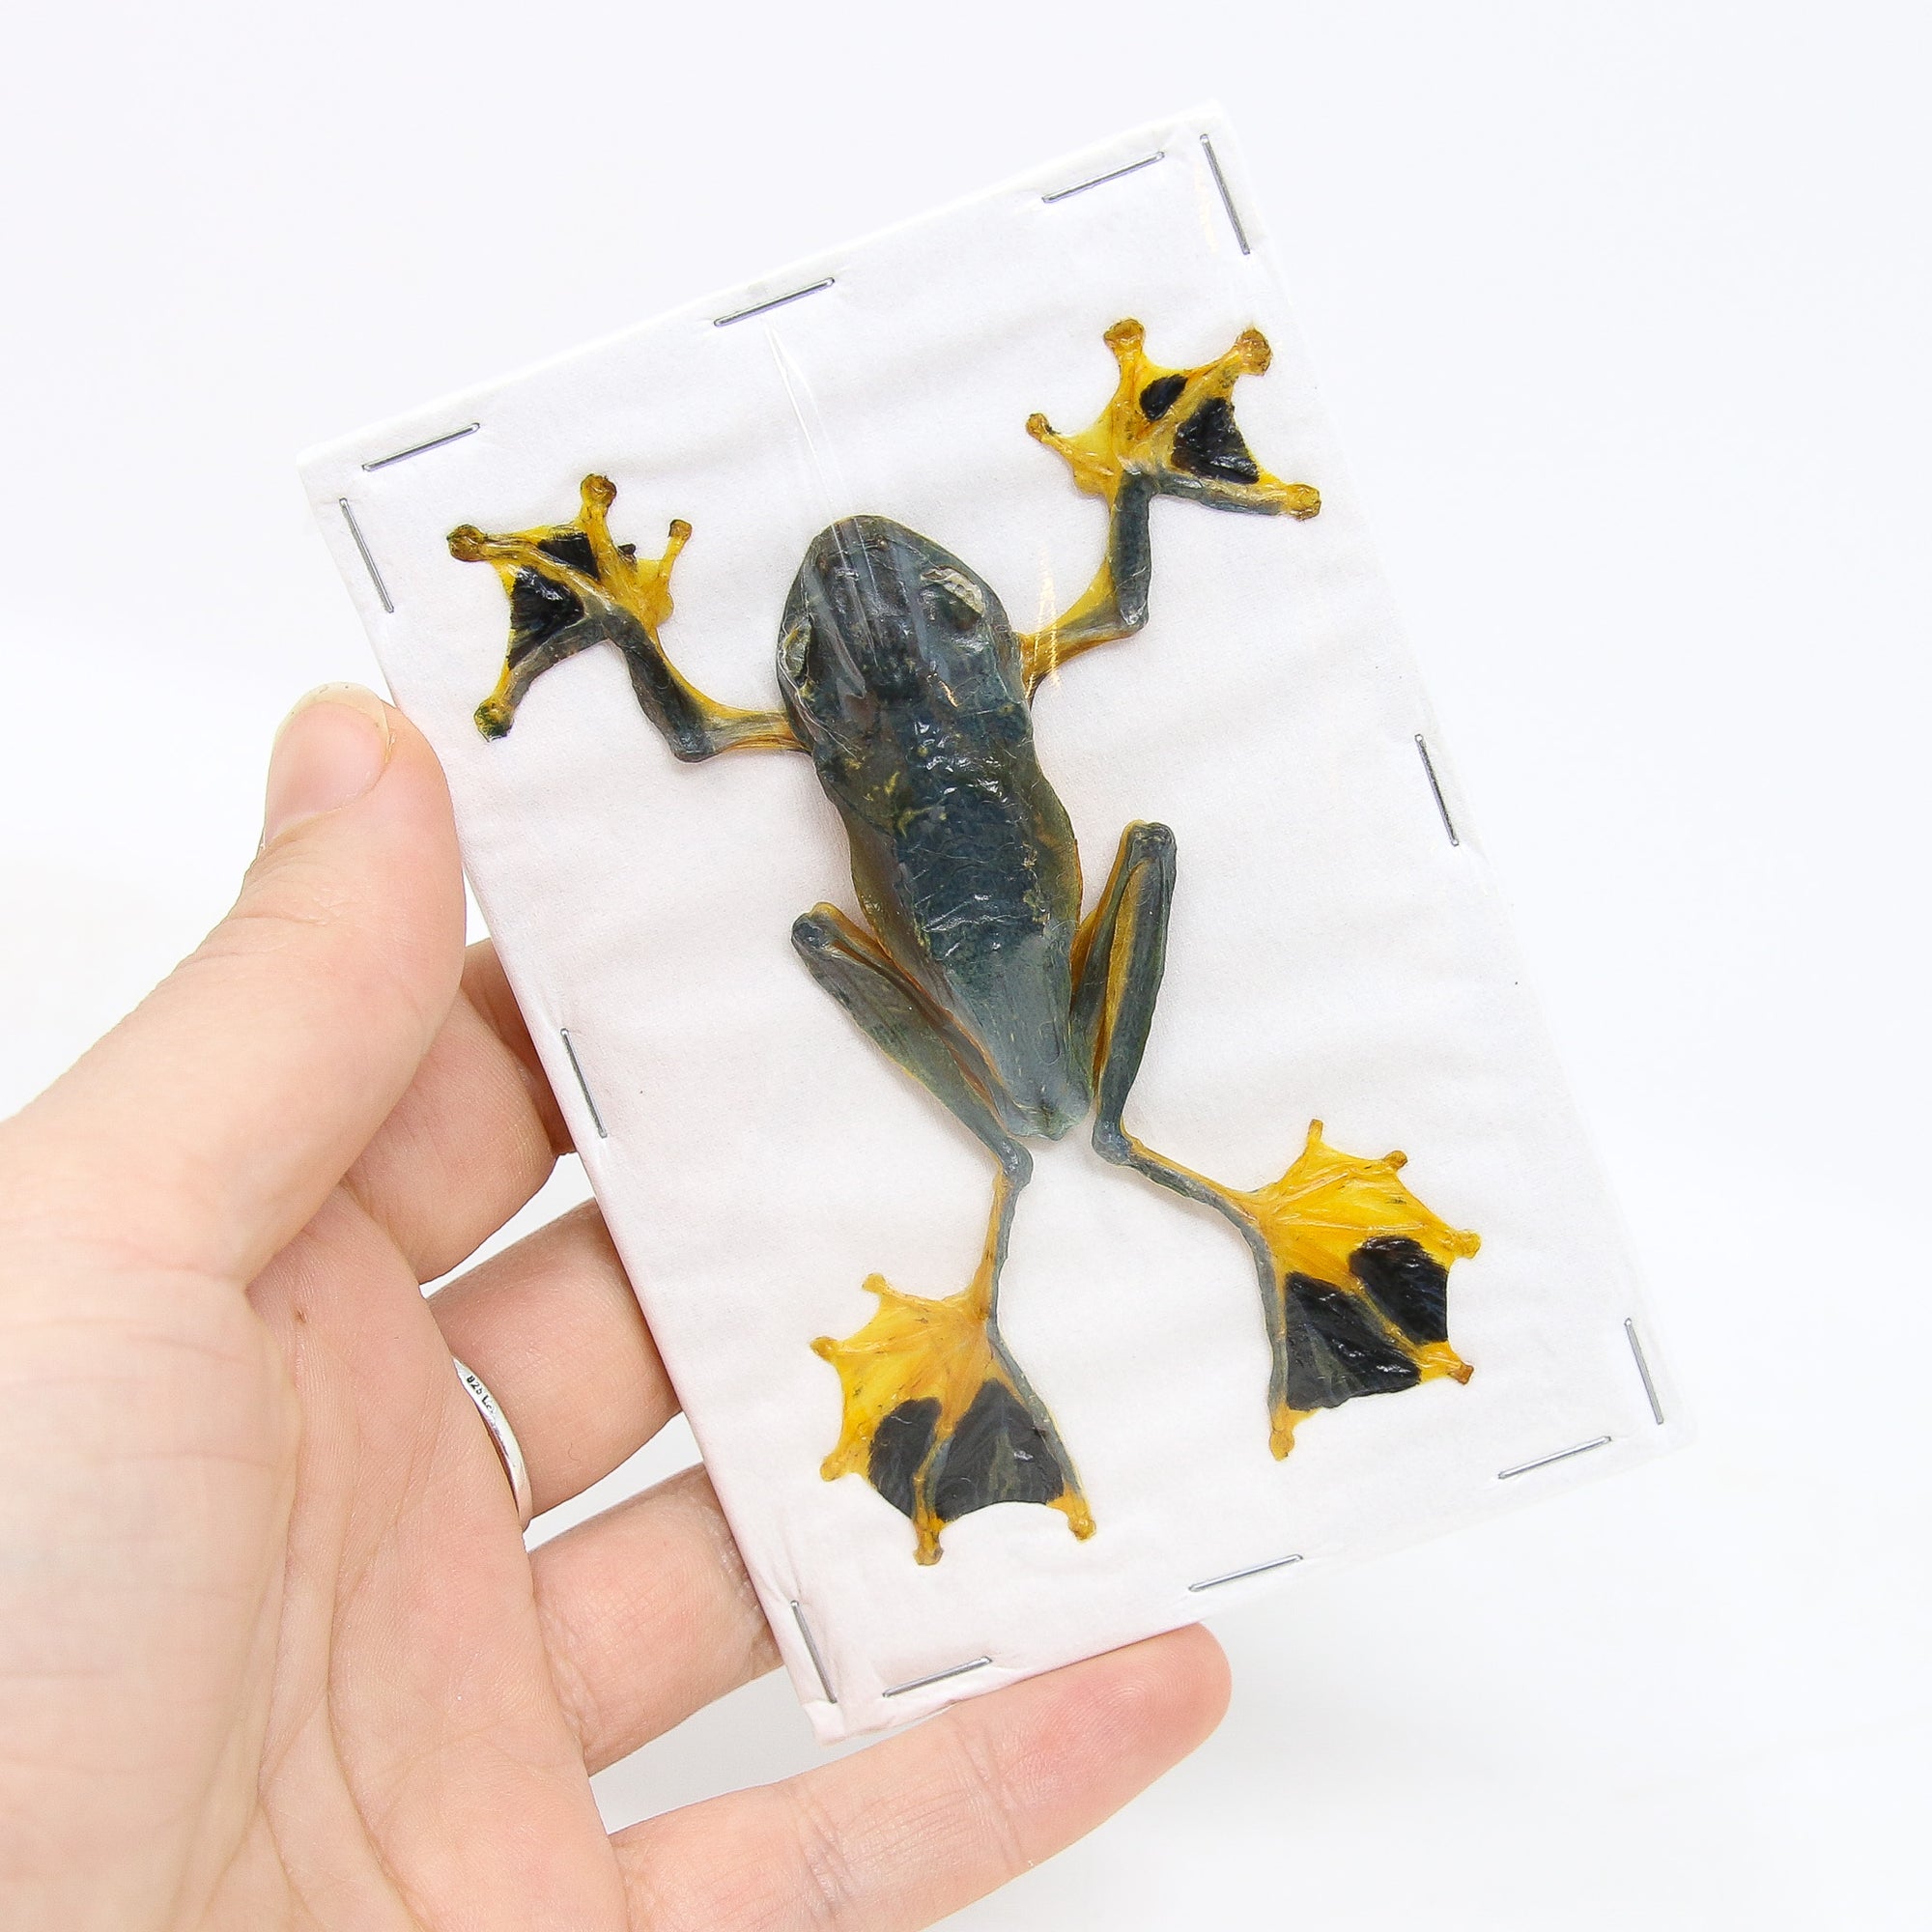 TWO (2) Reinwardt's Tree Frogs (Rhacophorus Reinwardtii) 3.5 Inches, A1 Real Dry-Preserved Specimens Taxidermy